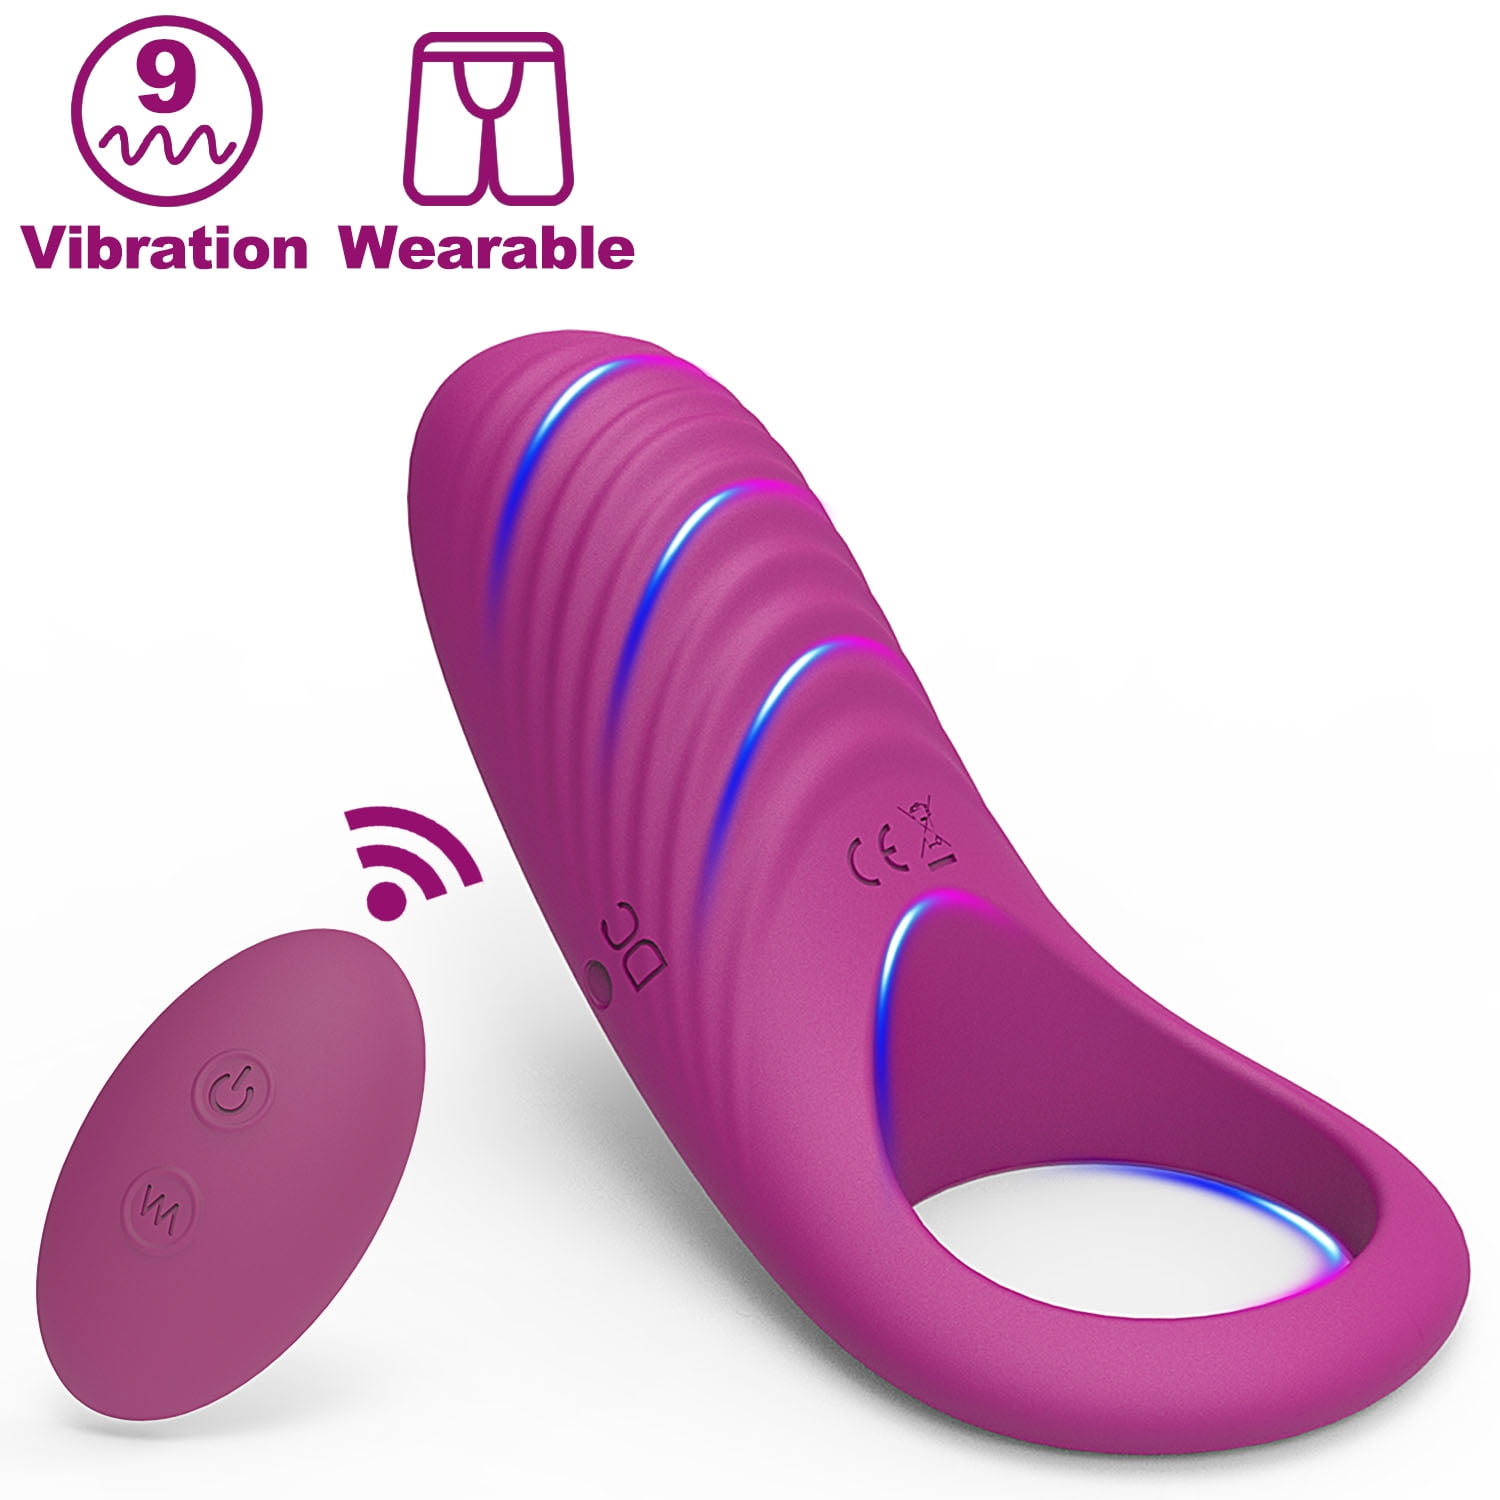 HMT Vibrator Thrusting Dildo Rabbit Vibrator for Women, G Spot Stimulator Sex Toys with Powerful Vibration and Tongue Licking Modes Telescopic and Heating Function,4 IN 1 Waterproof Adult Toy for Couples - photo photo